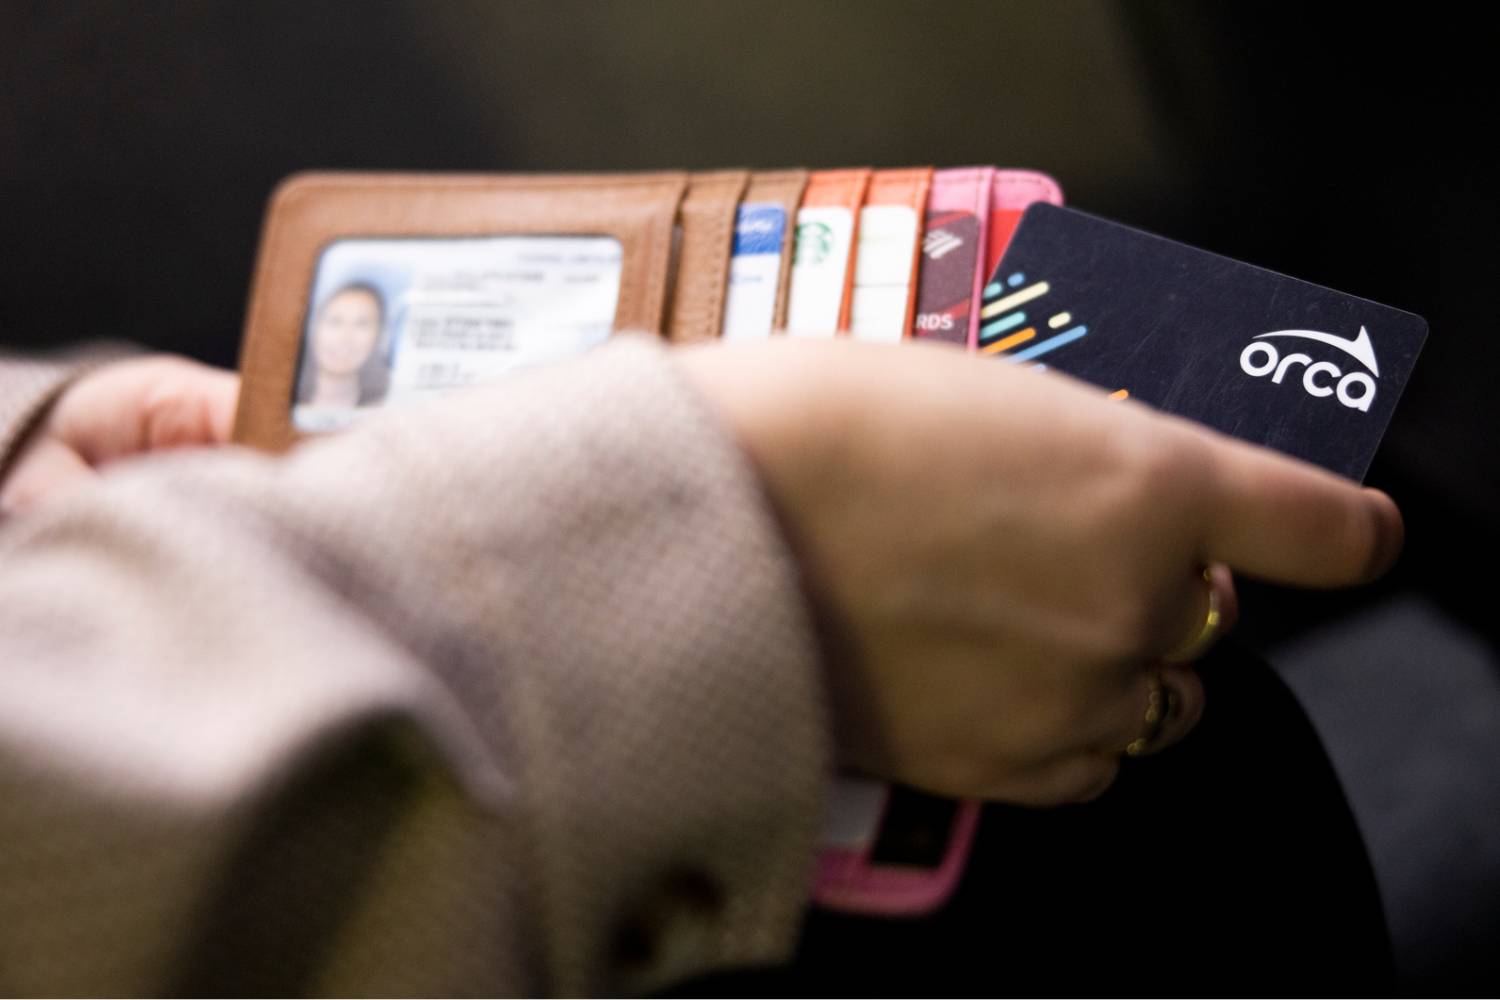 Close-up of a woman's hand pulling a black ORCA card from her wallet.